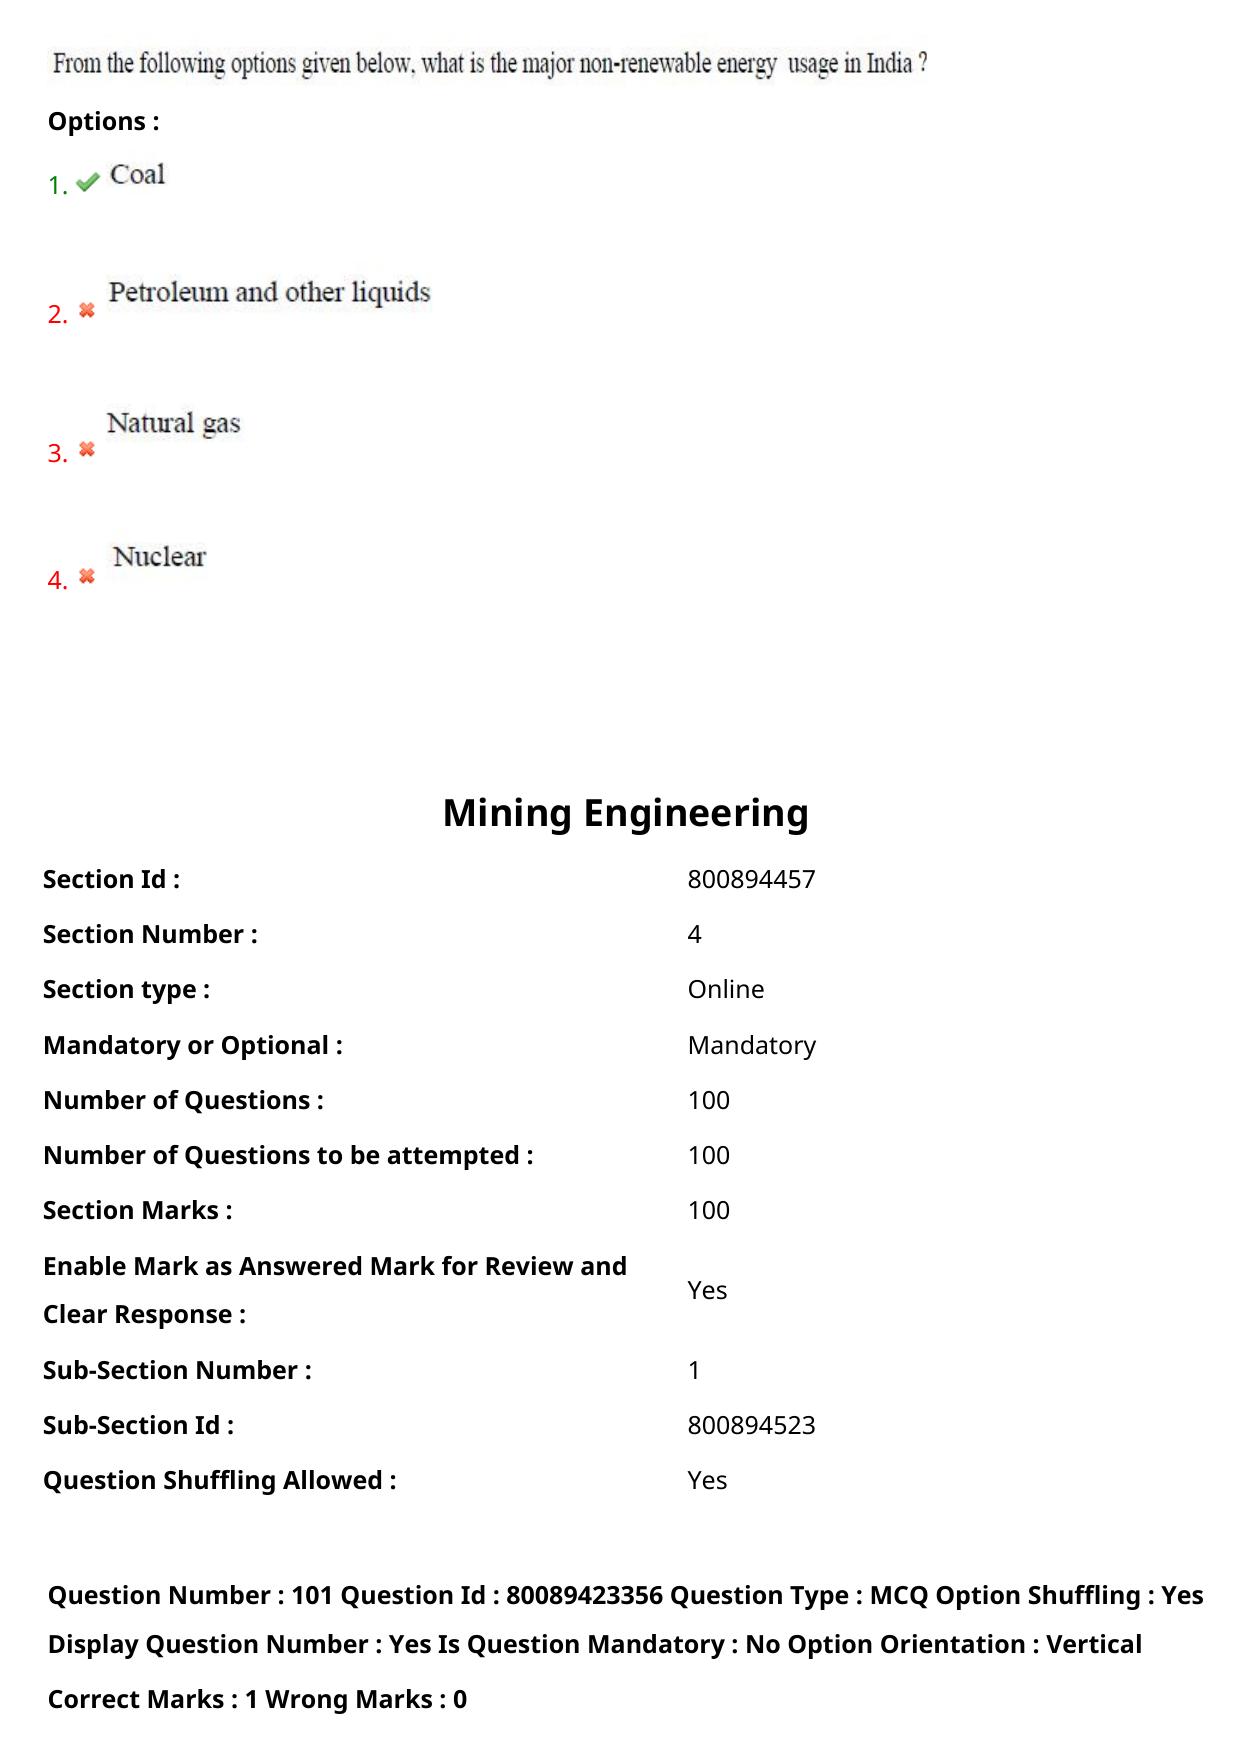 TS ECET 2021 Mining Engineering Question Paper - Page 56